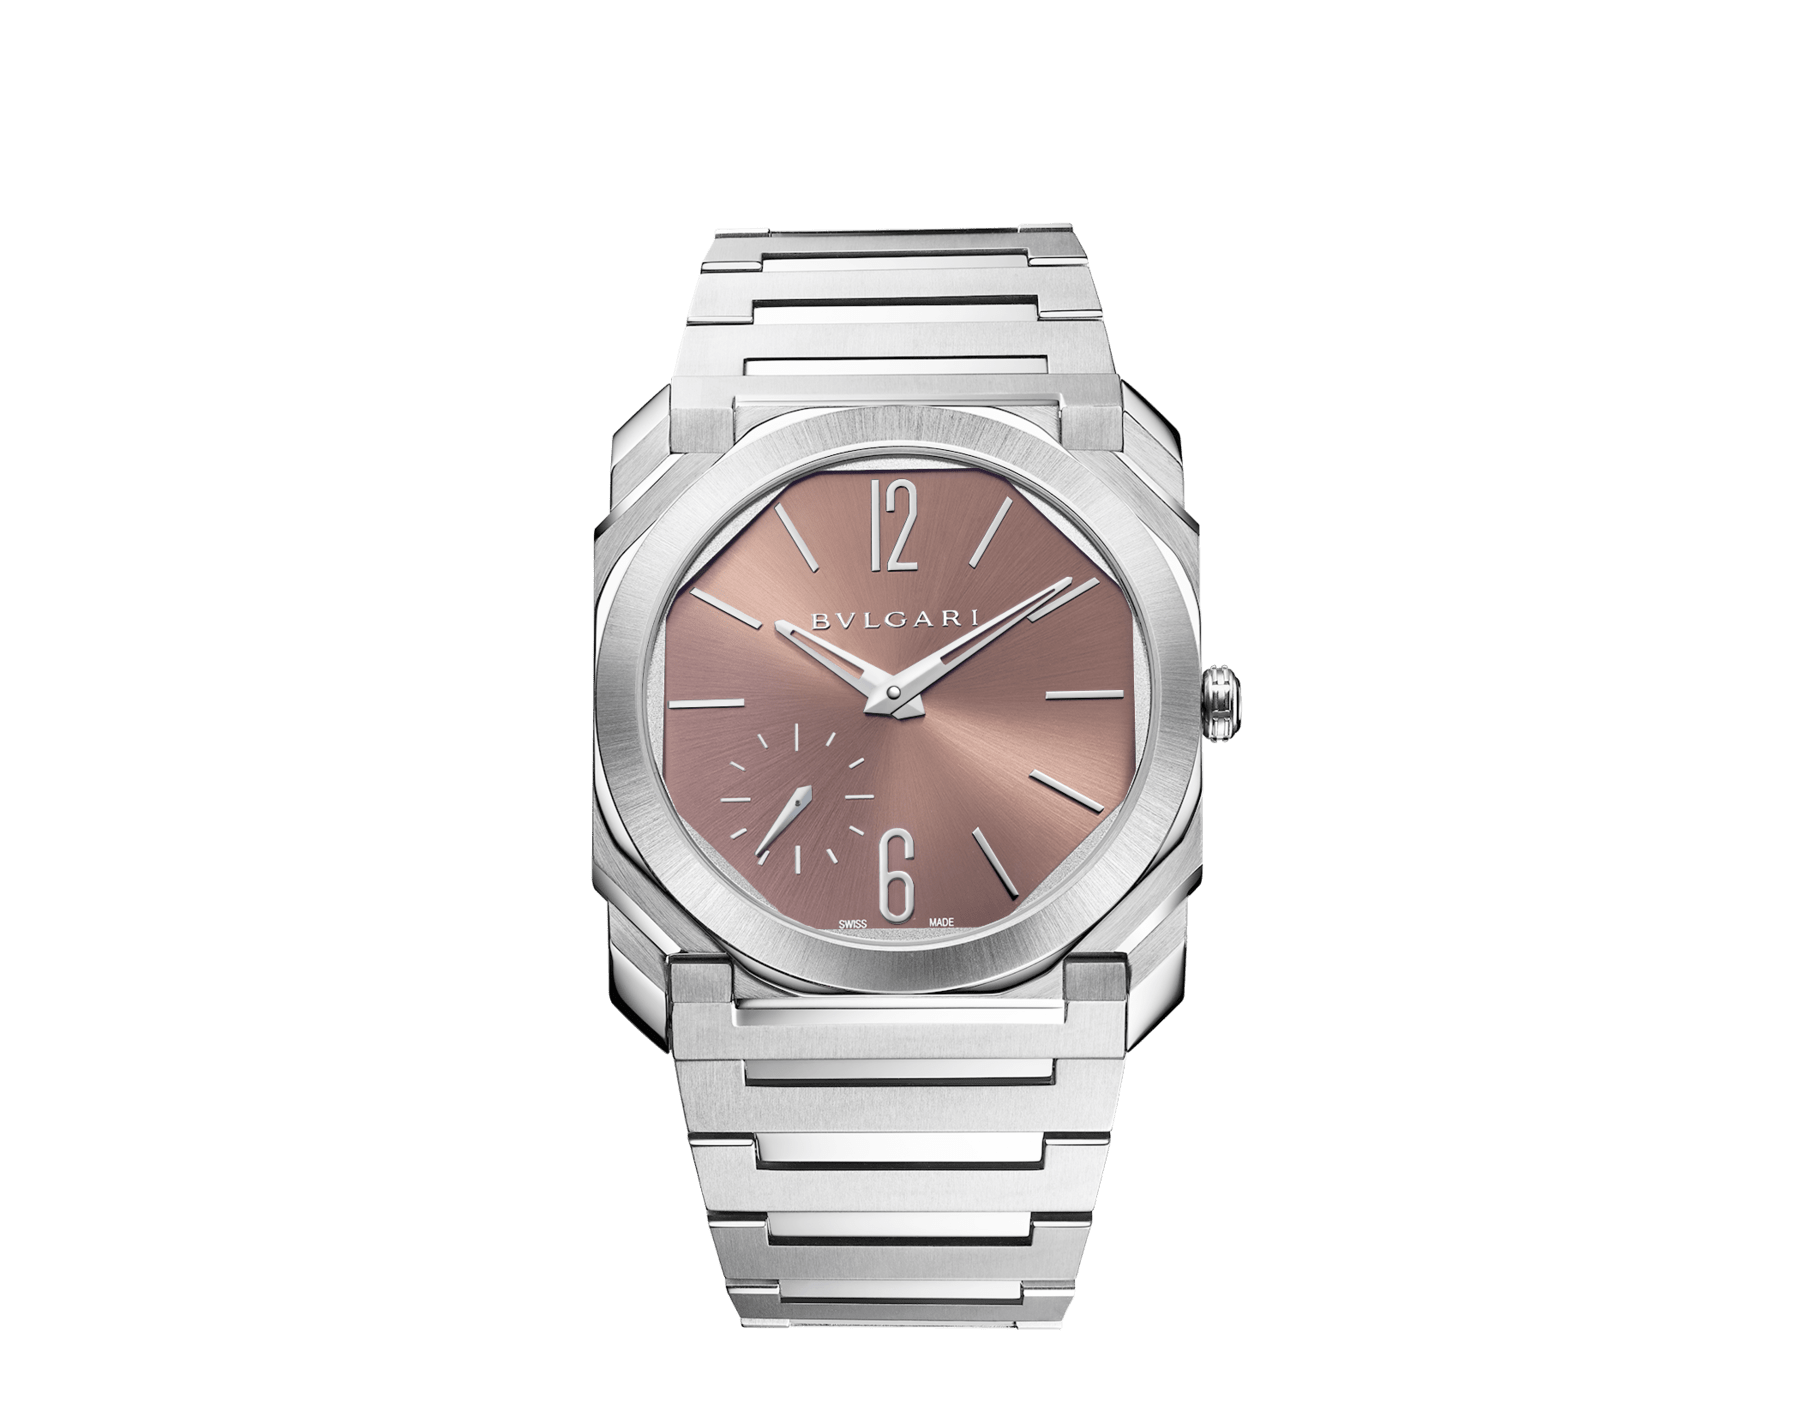 Octo Finissimo Automatic watch in satin-polished stainless steel with mechanical manufacture ultra-thin movement (2.23 mm thick), automatic winding and sunray metallic copper tone dial. Water resistant up to 100 metres 103856 image 1